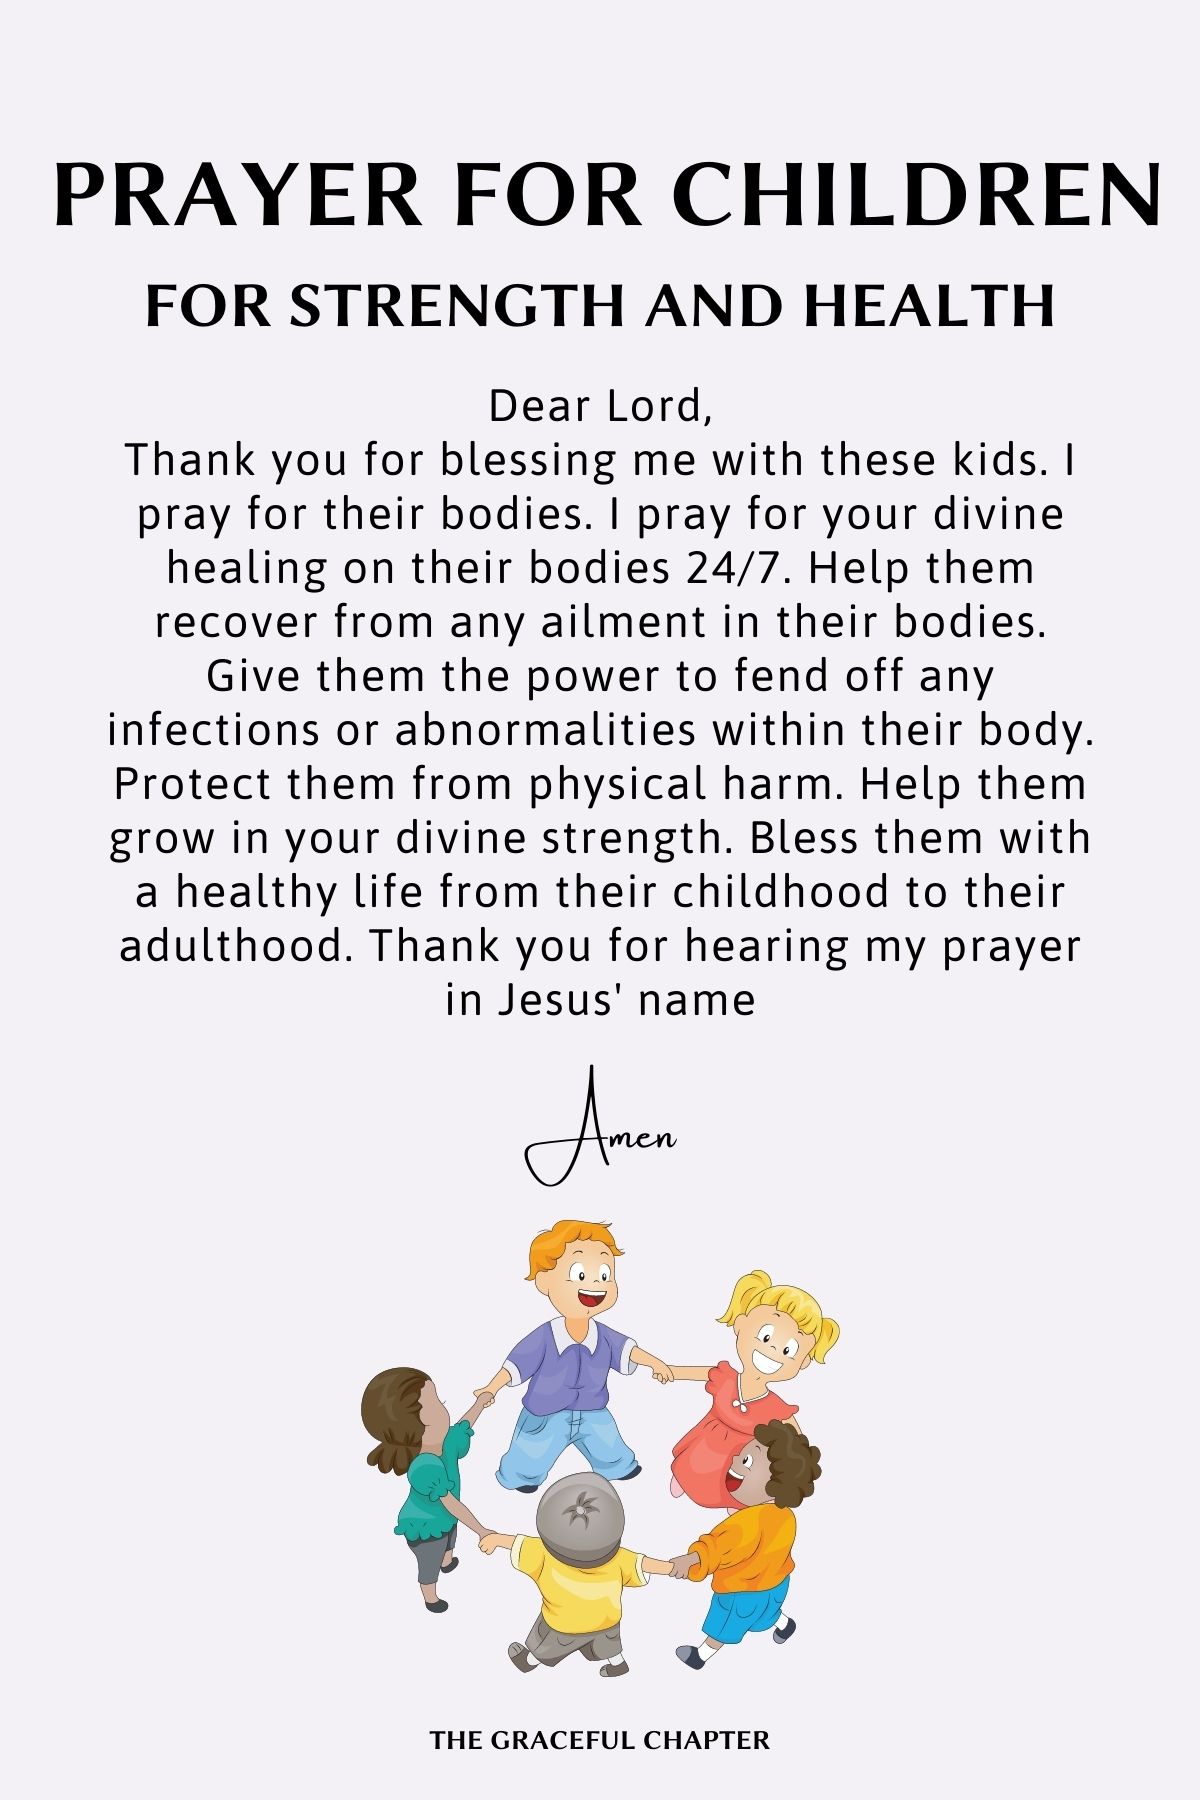 prayer points for children - for strength and health